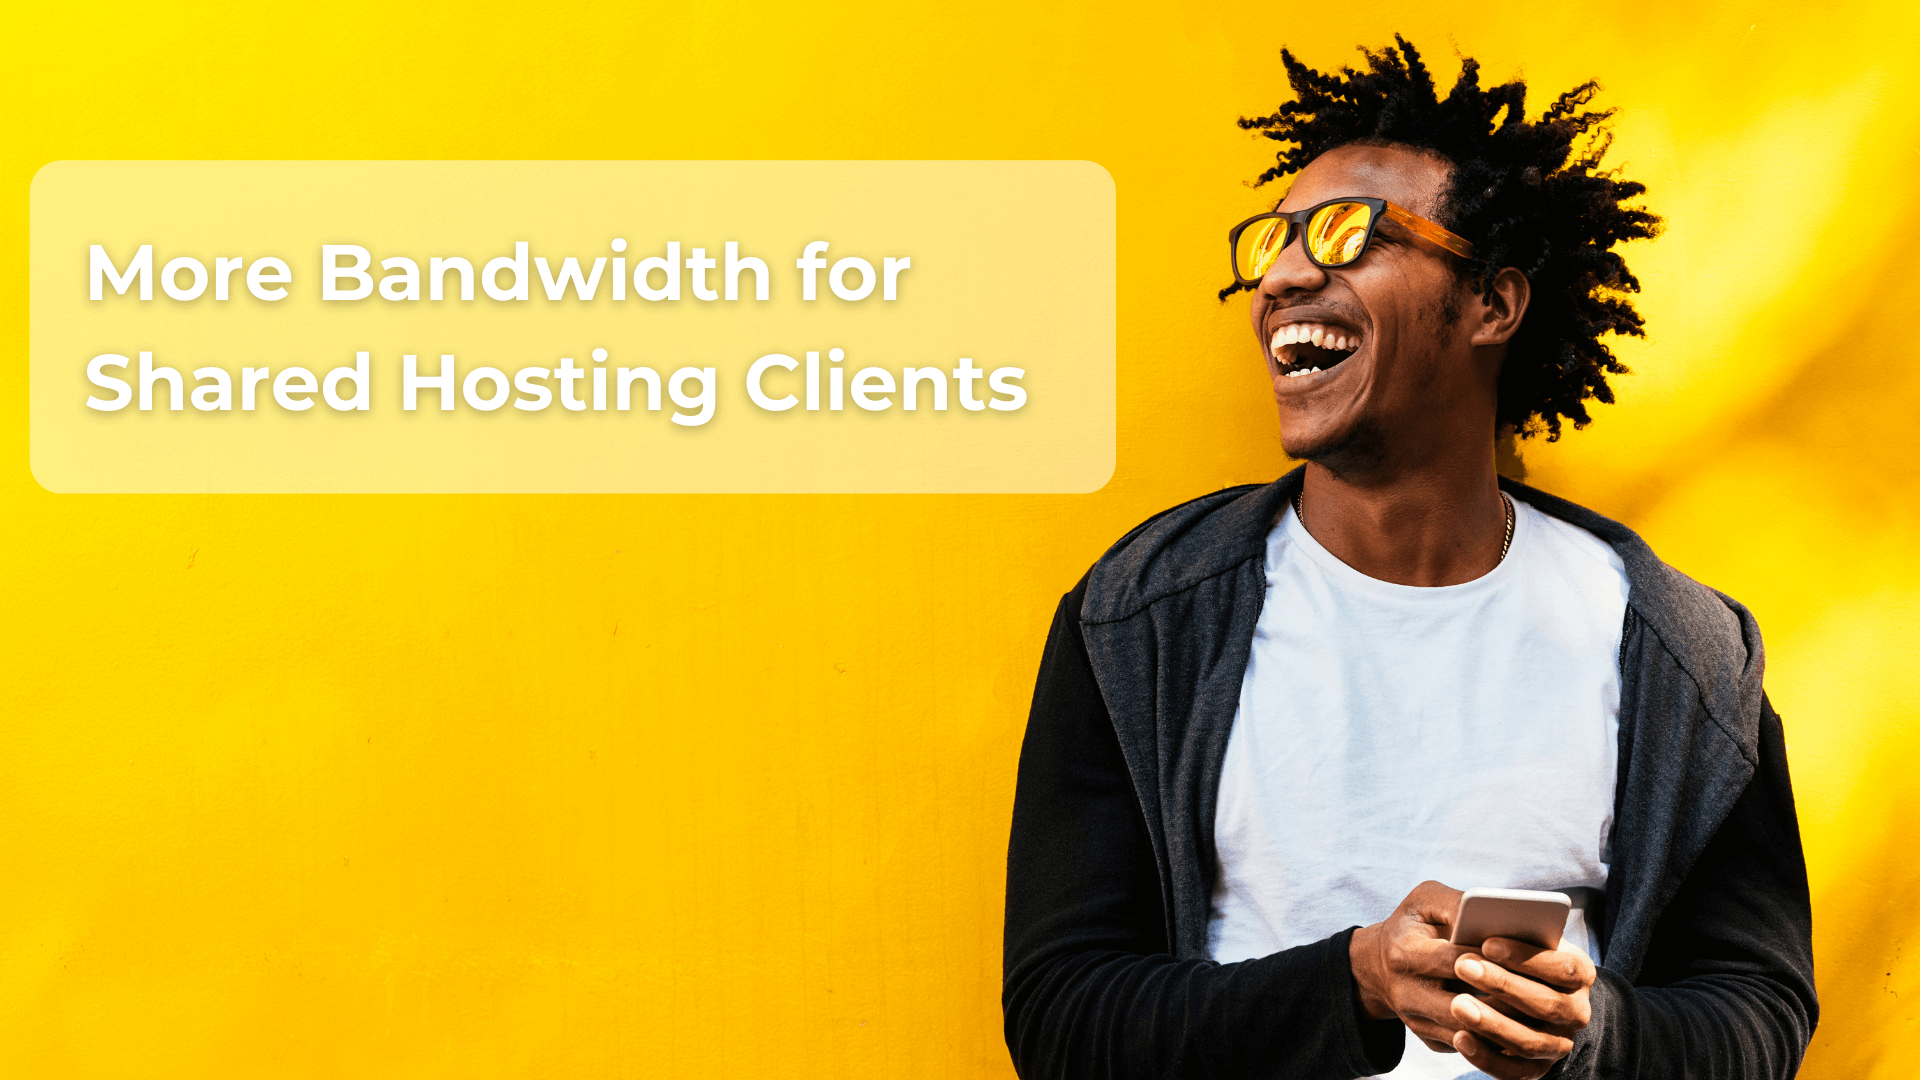 More Bandwidth for Shared Hosting Clients